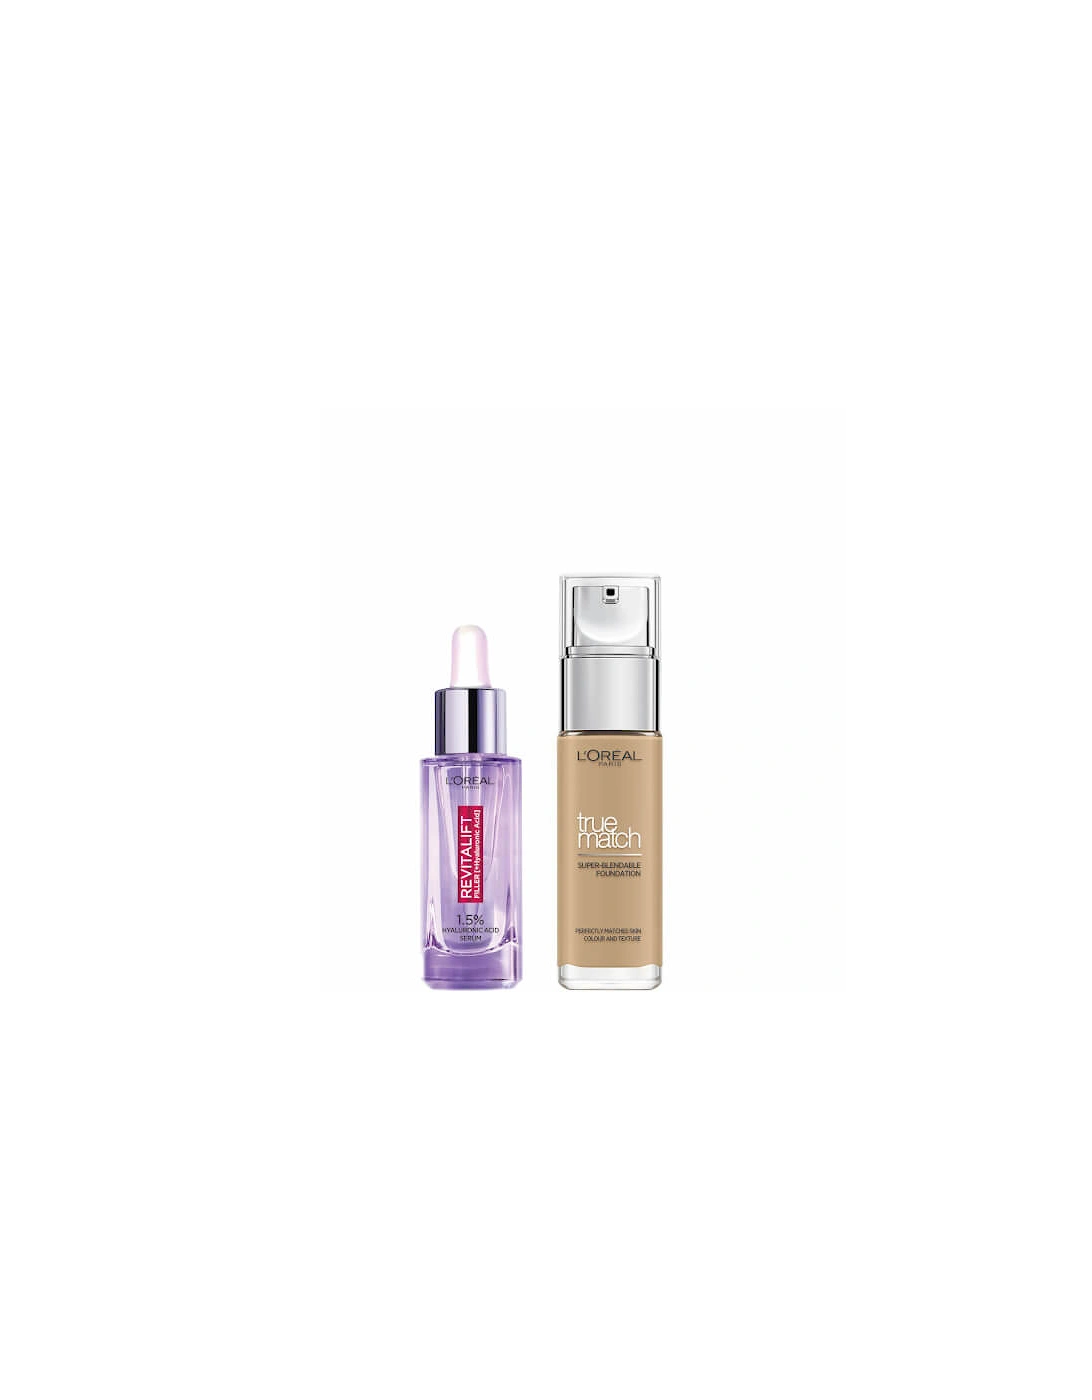 L’Oreal Paris Hyaluronic Acid Filler Serum and True Match Hyaluronic Acid Foundation Duo - 3W Golden Beige, 2 of 1